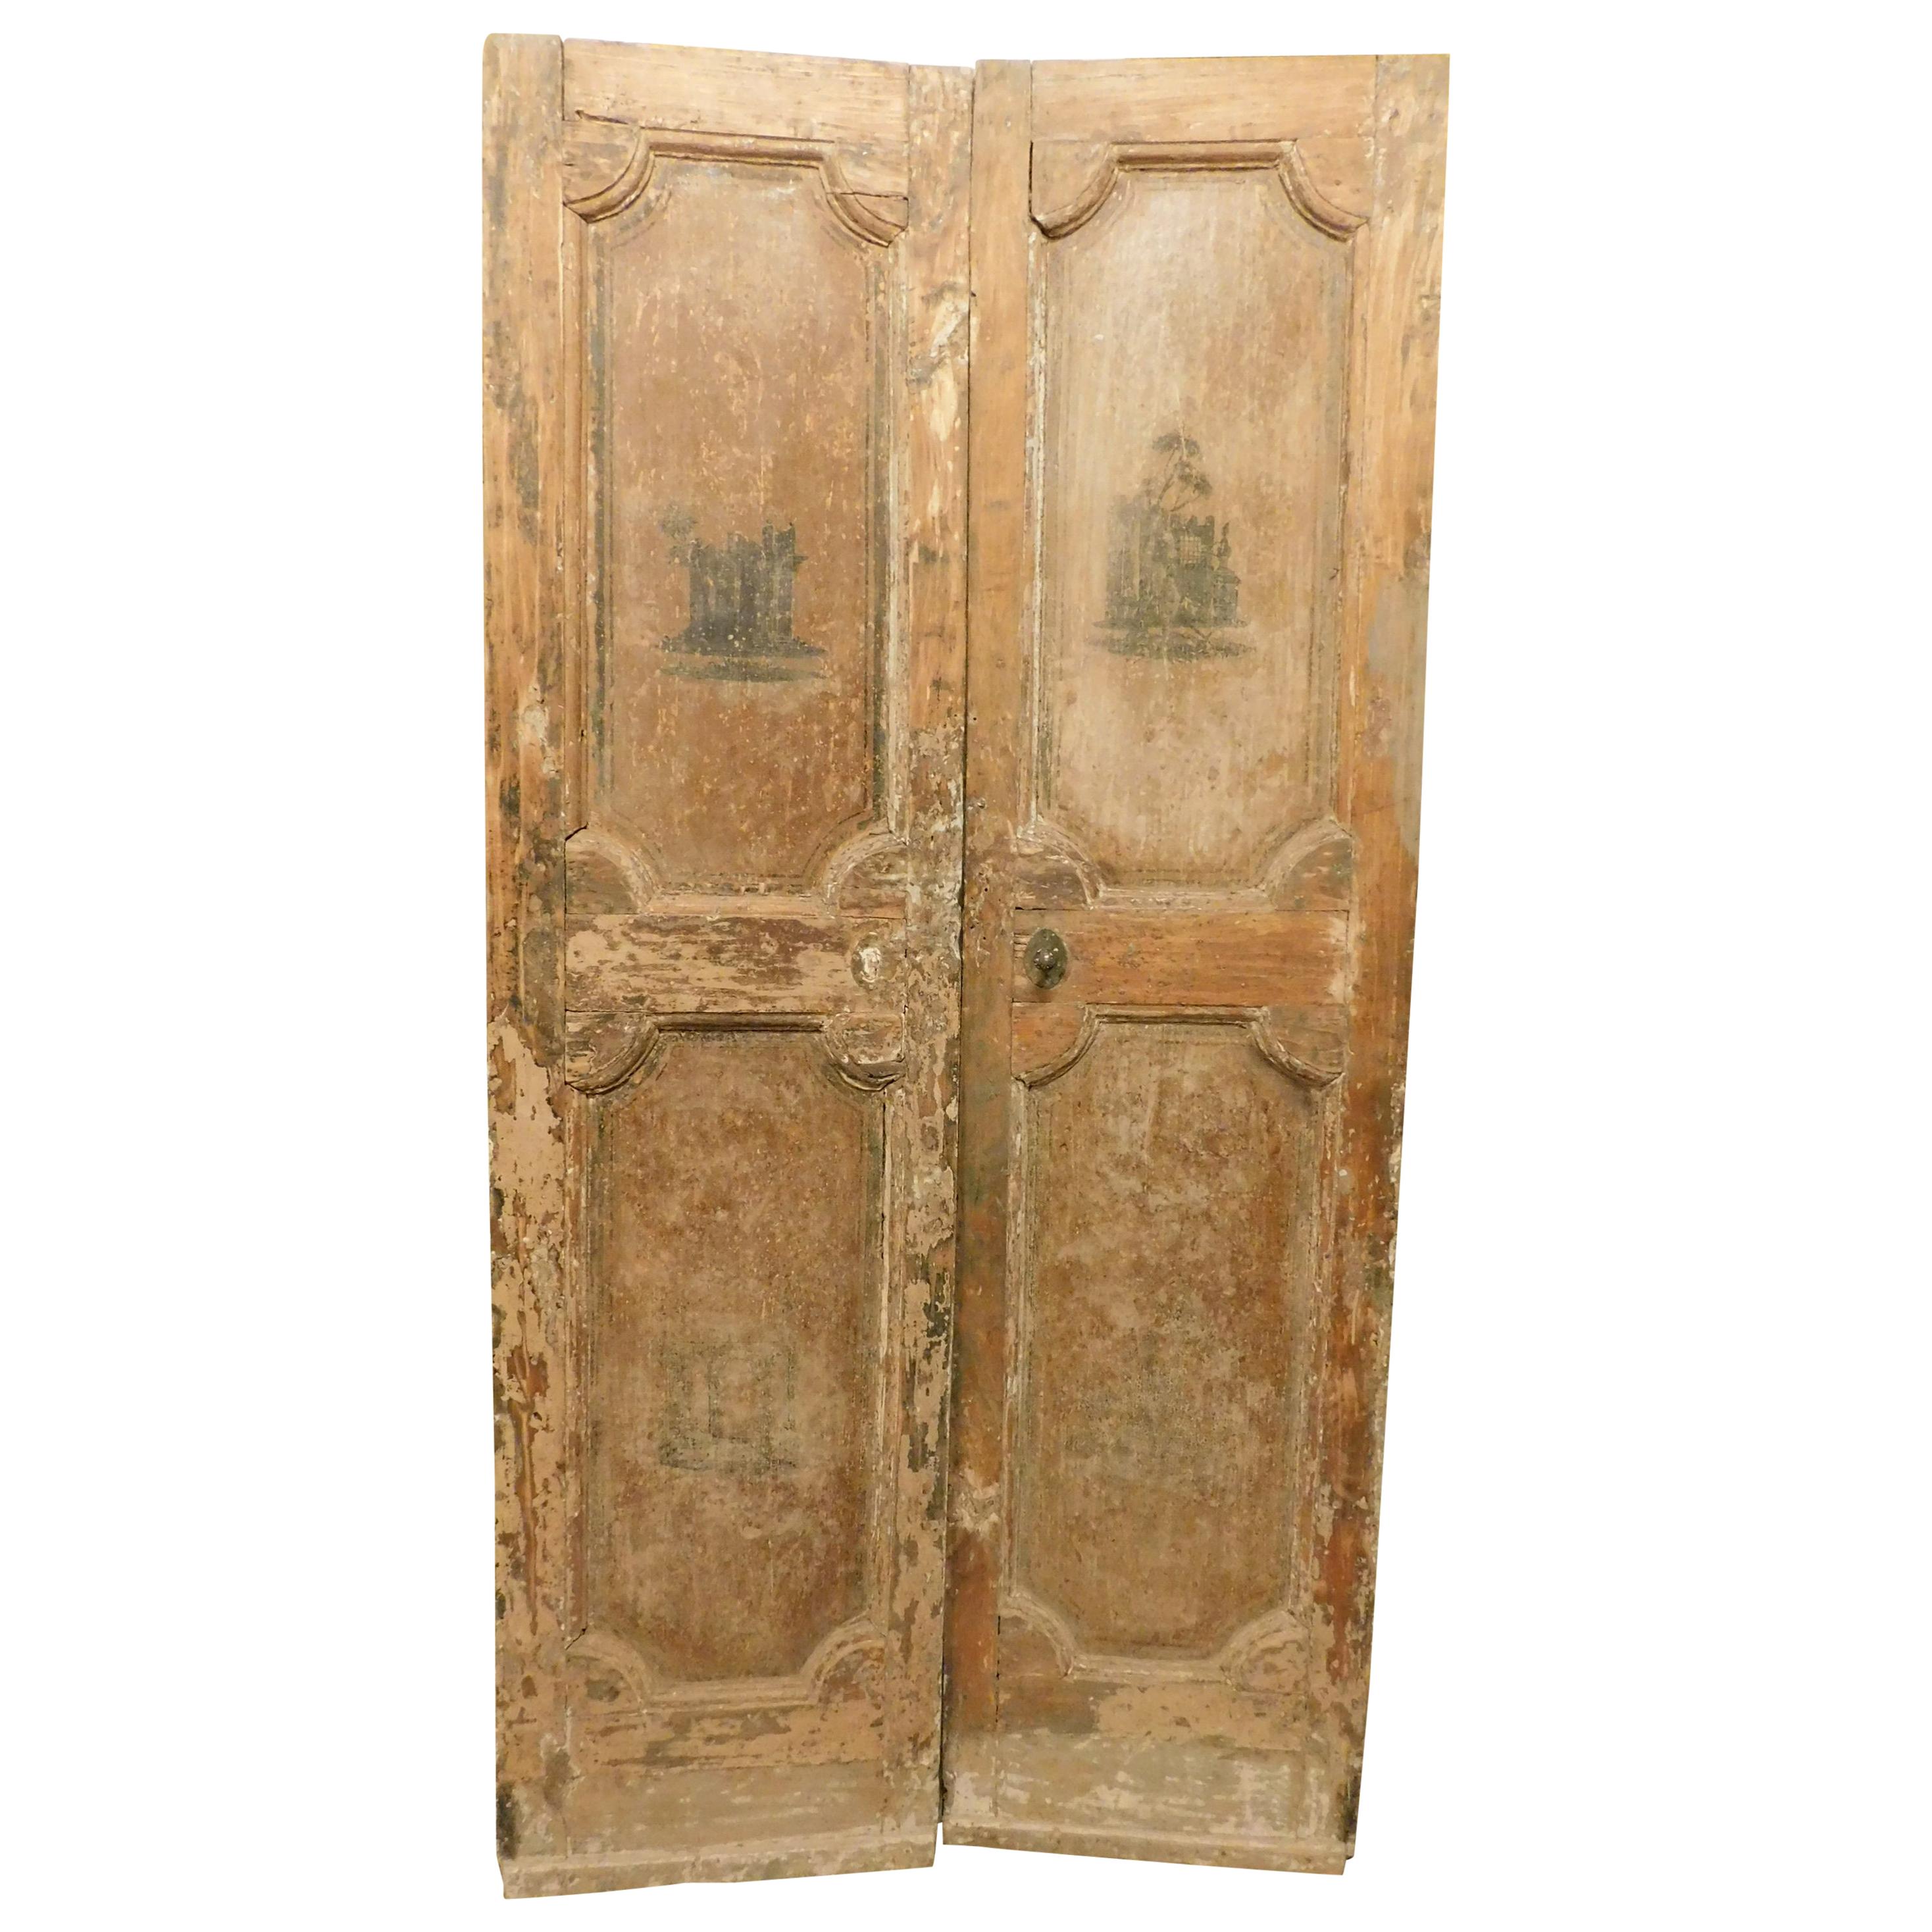 18th Century Antique Beige Lacquered Double Door with Sculptures Painted, Italy